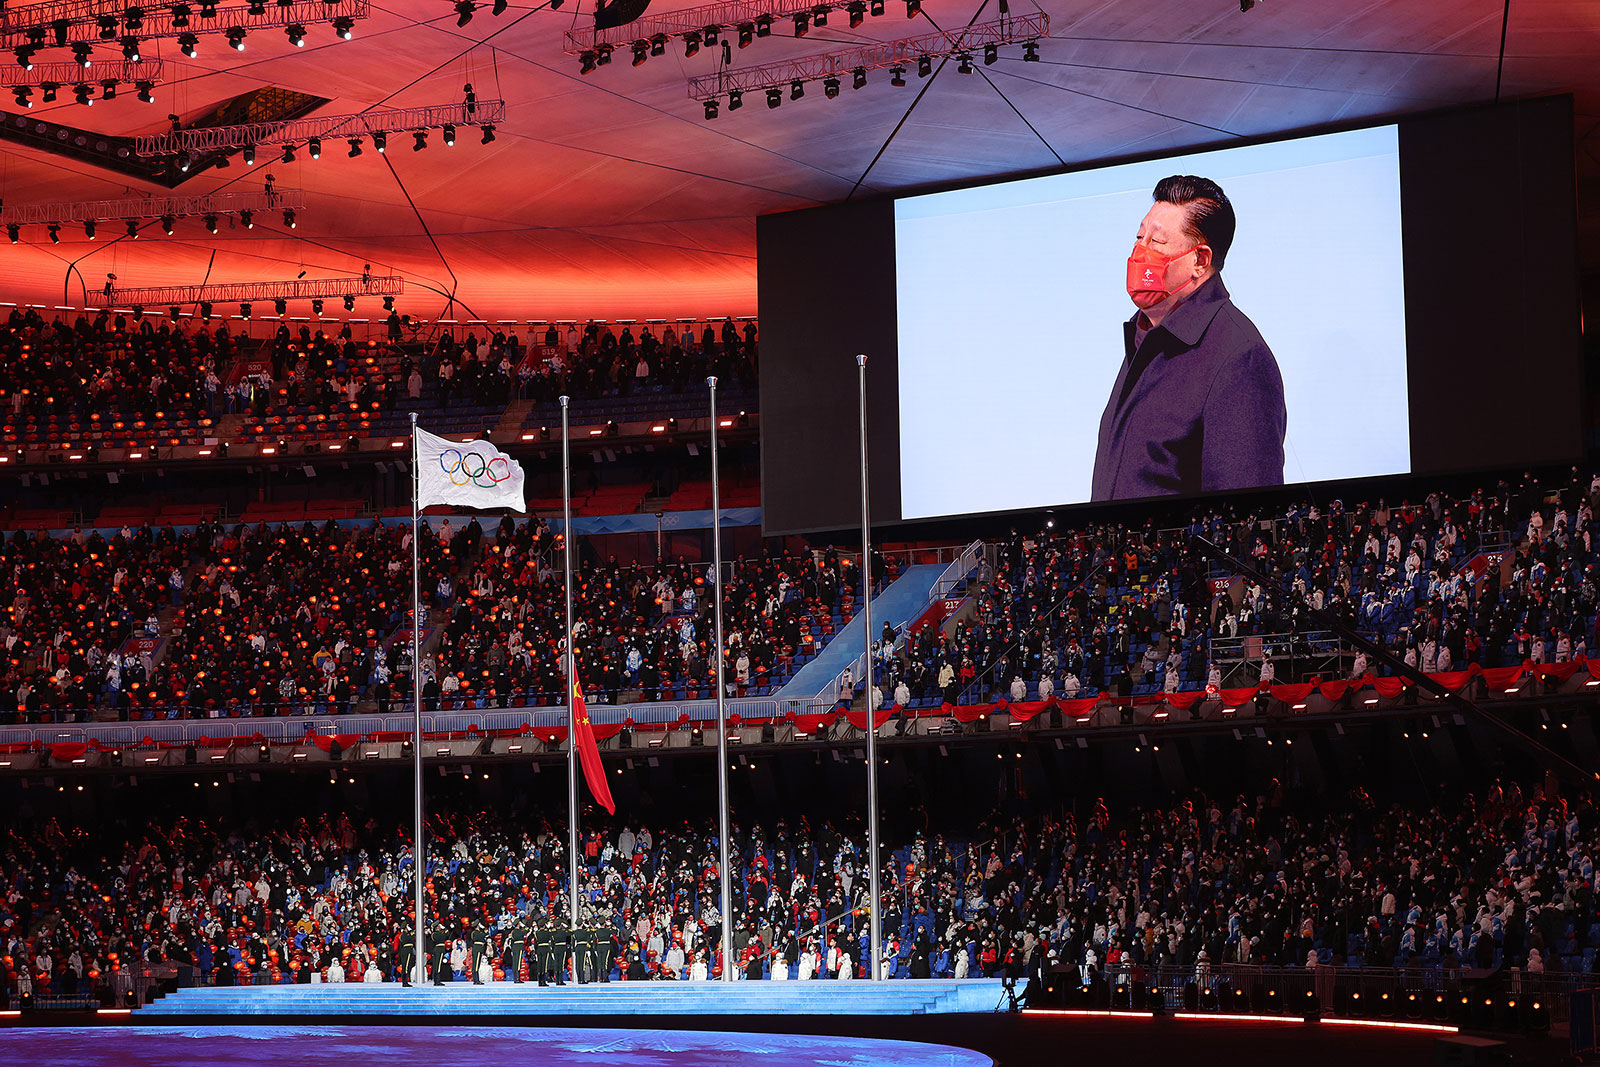 China's President Xi Jinping is seen on a screen during the Closing Ceremony on February 20.